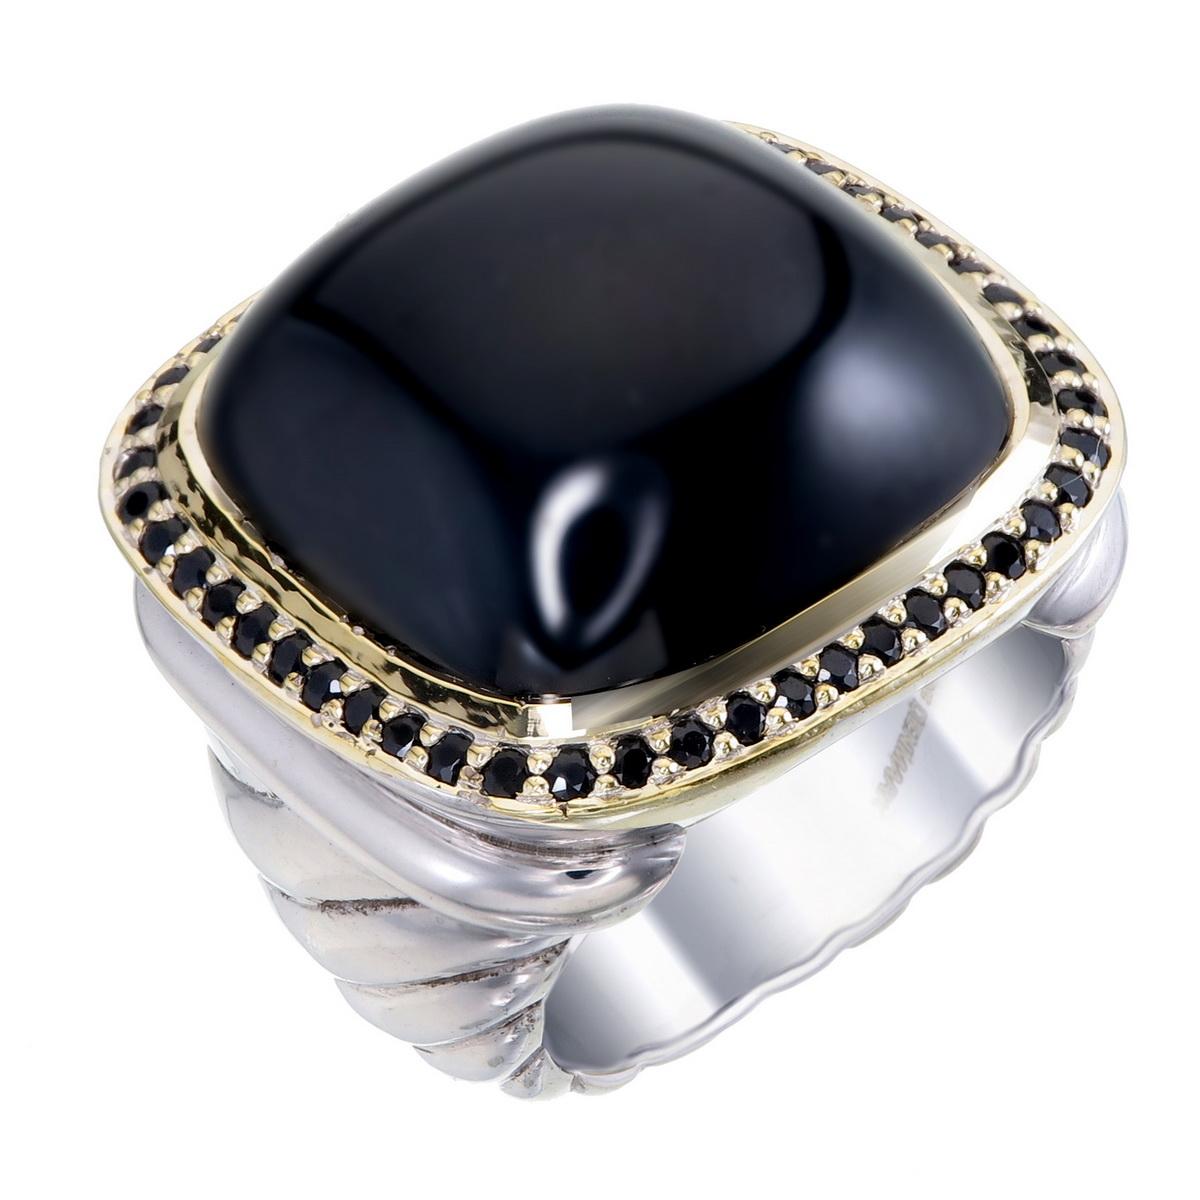 Orloff of Denmark; Sterling Silver Statement ring featuring a total of 0.50 carats of Black Sapphires surrounding a huge Onyx, set in an 18 Karat Gold-Plated bezel

Introducing a truly captivating piece, this statement ring is a stunning fusion of